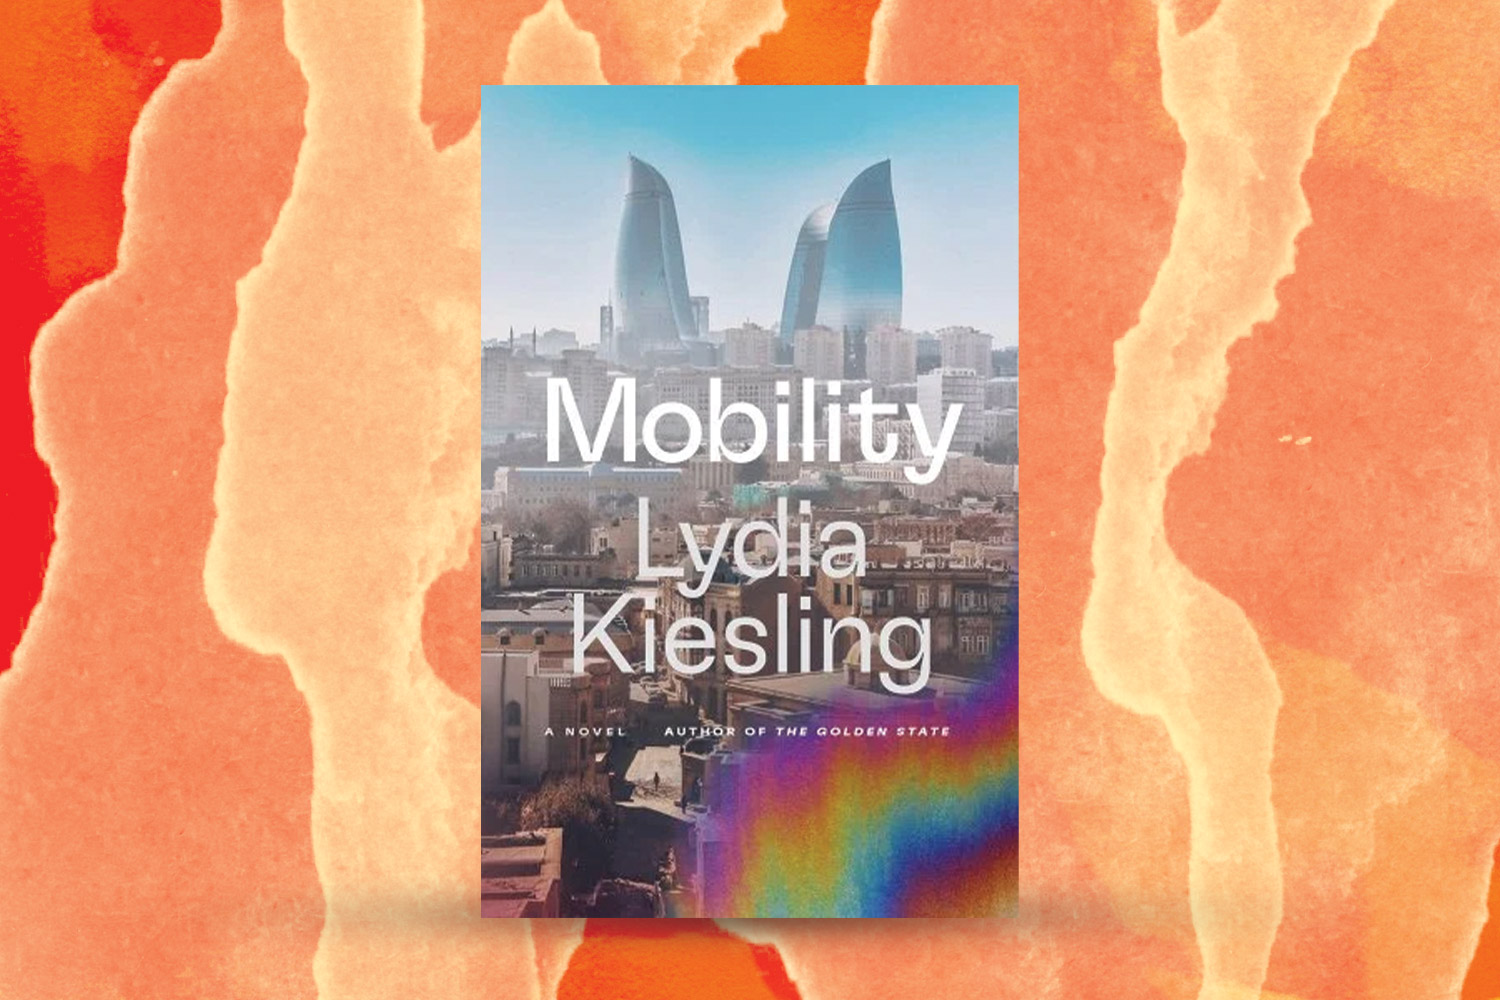 "Mobility" cover